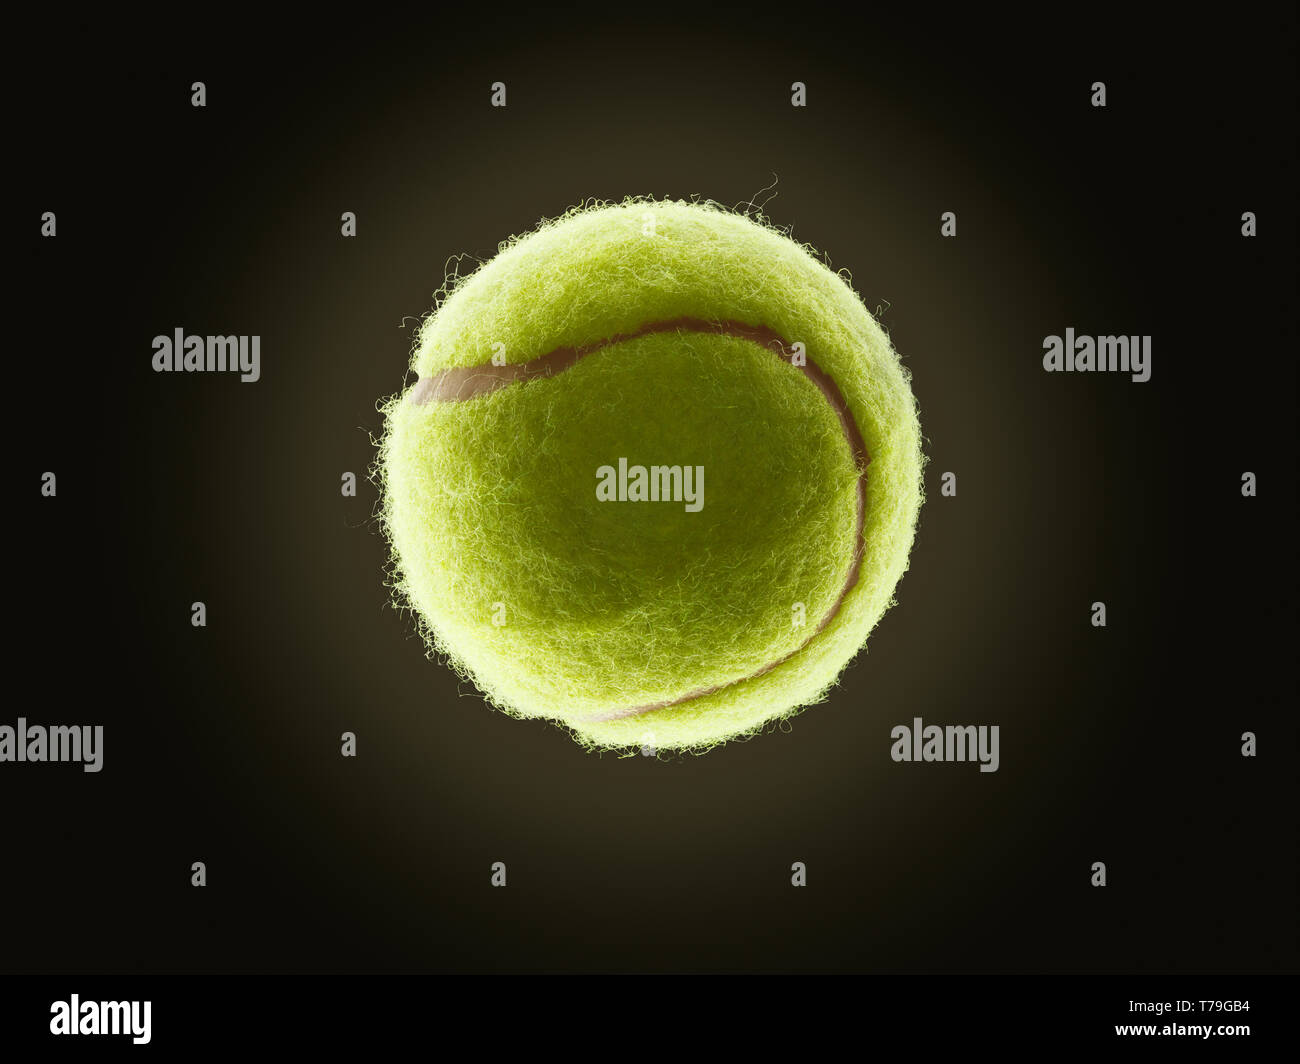 single tennis ball with eclipse like effect on a dark background Stock Photo